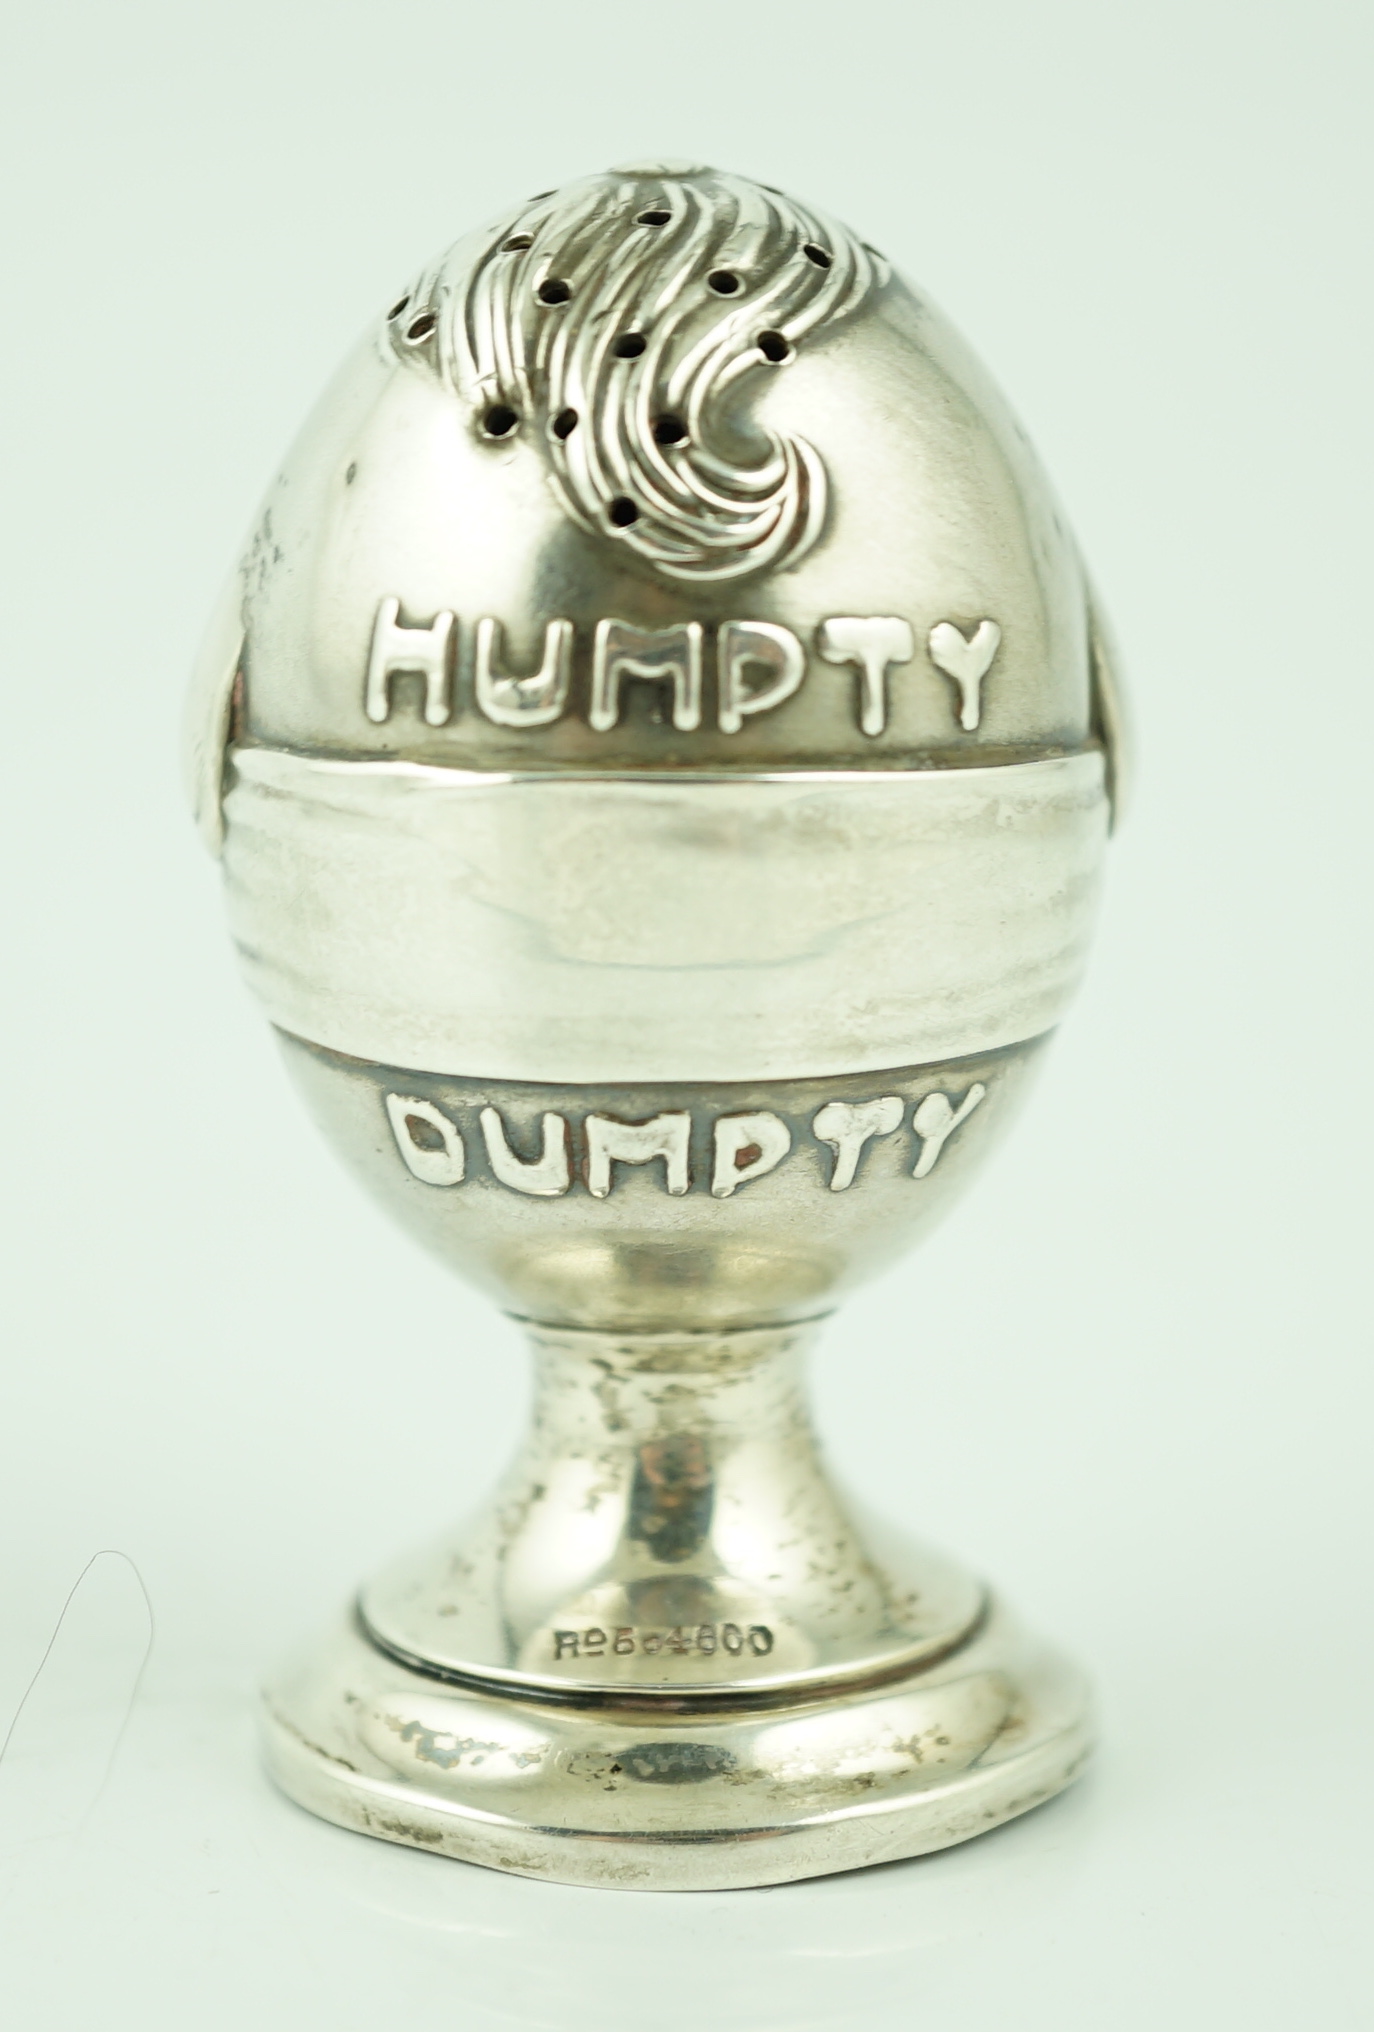 A George V novelty silver pepperette, modelled as Humpty Dumpty, by Levy & Salaman